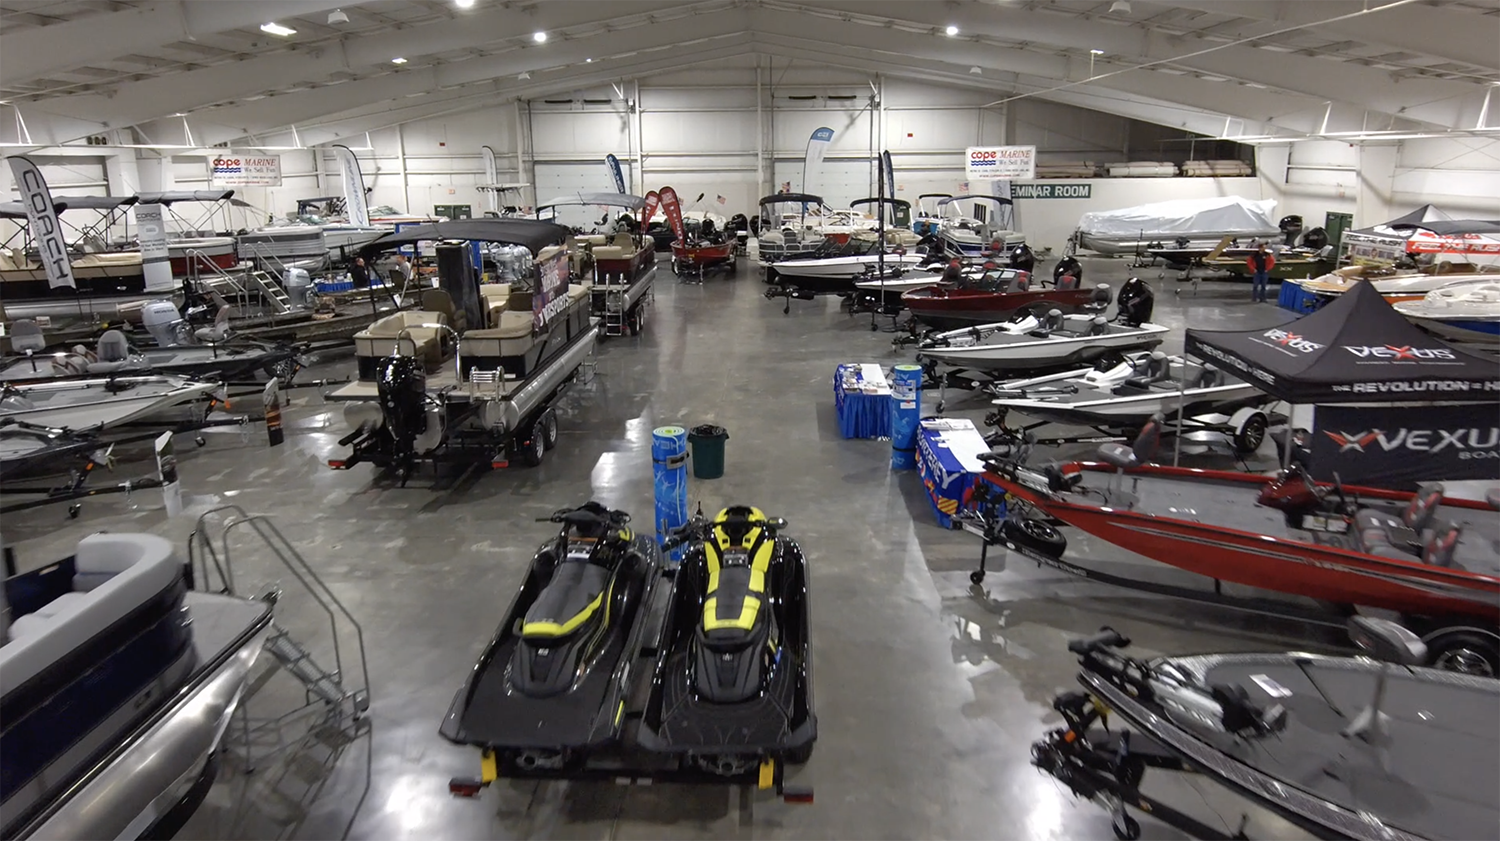 Springfield Boat Show // Boating Expo for Consumers Looking for the